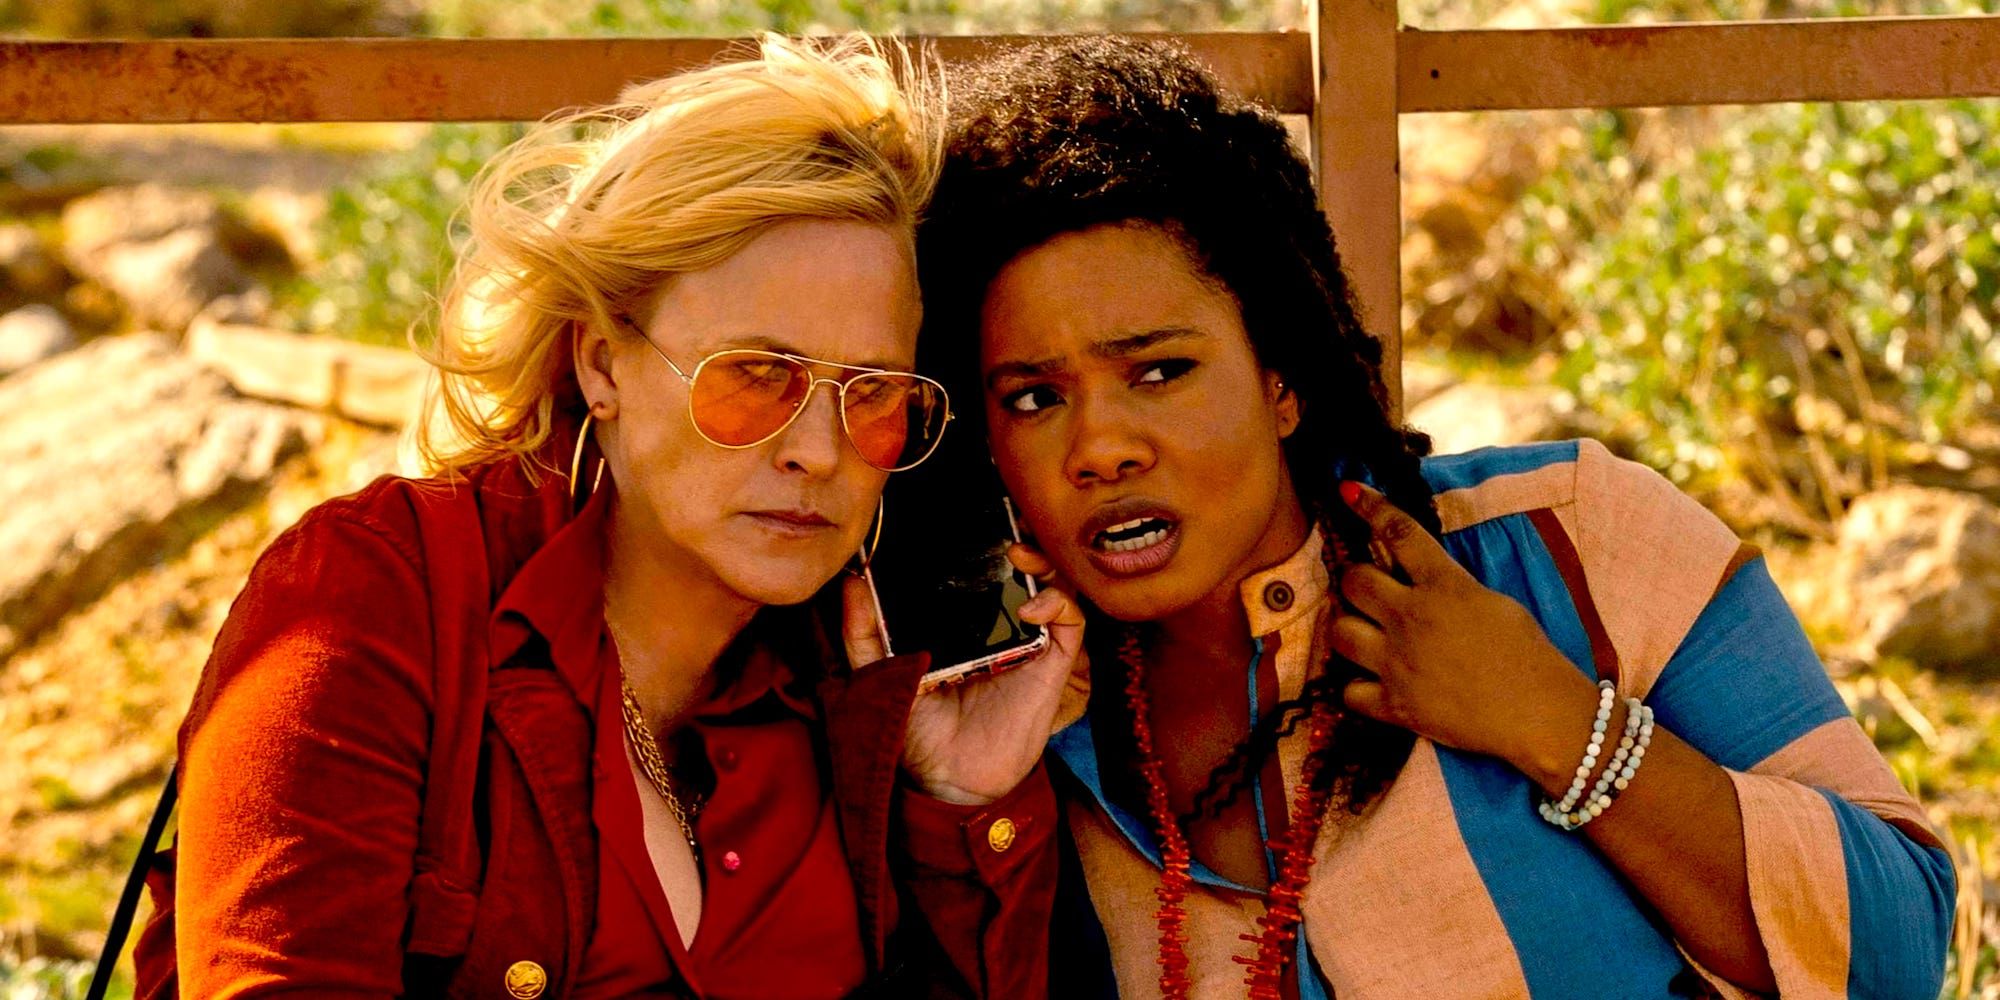 Patricia Arquette and Weruche Opia On the Phone in High Desert